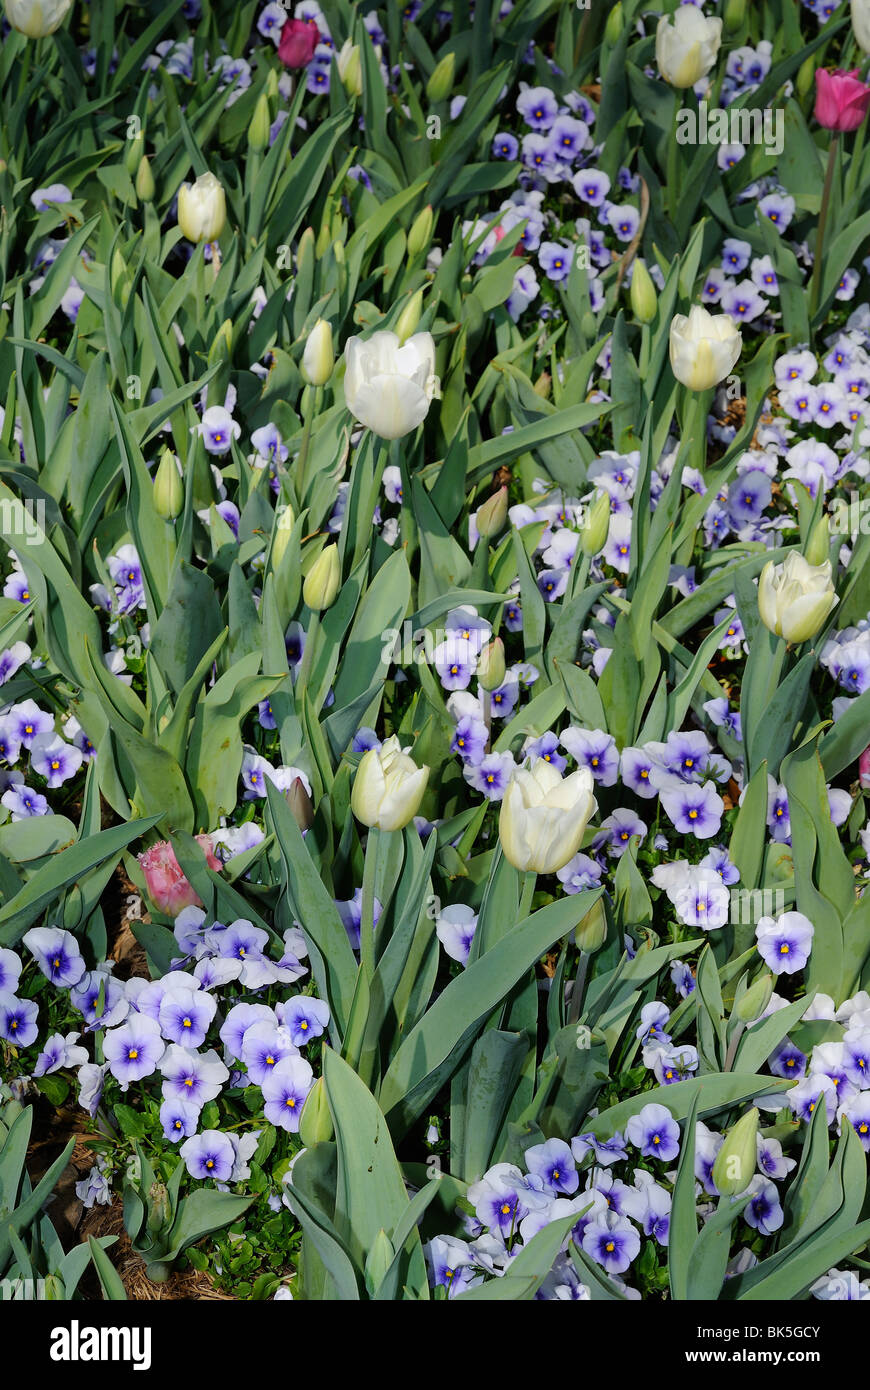 Flower bed of tulips and pansies blooming in the Dallas Arboretum Park, Texas Stock Photo